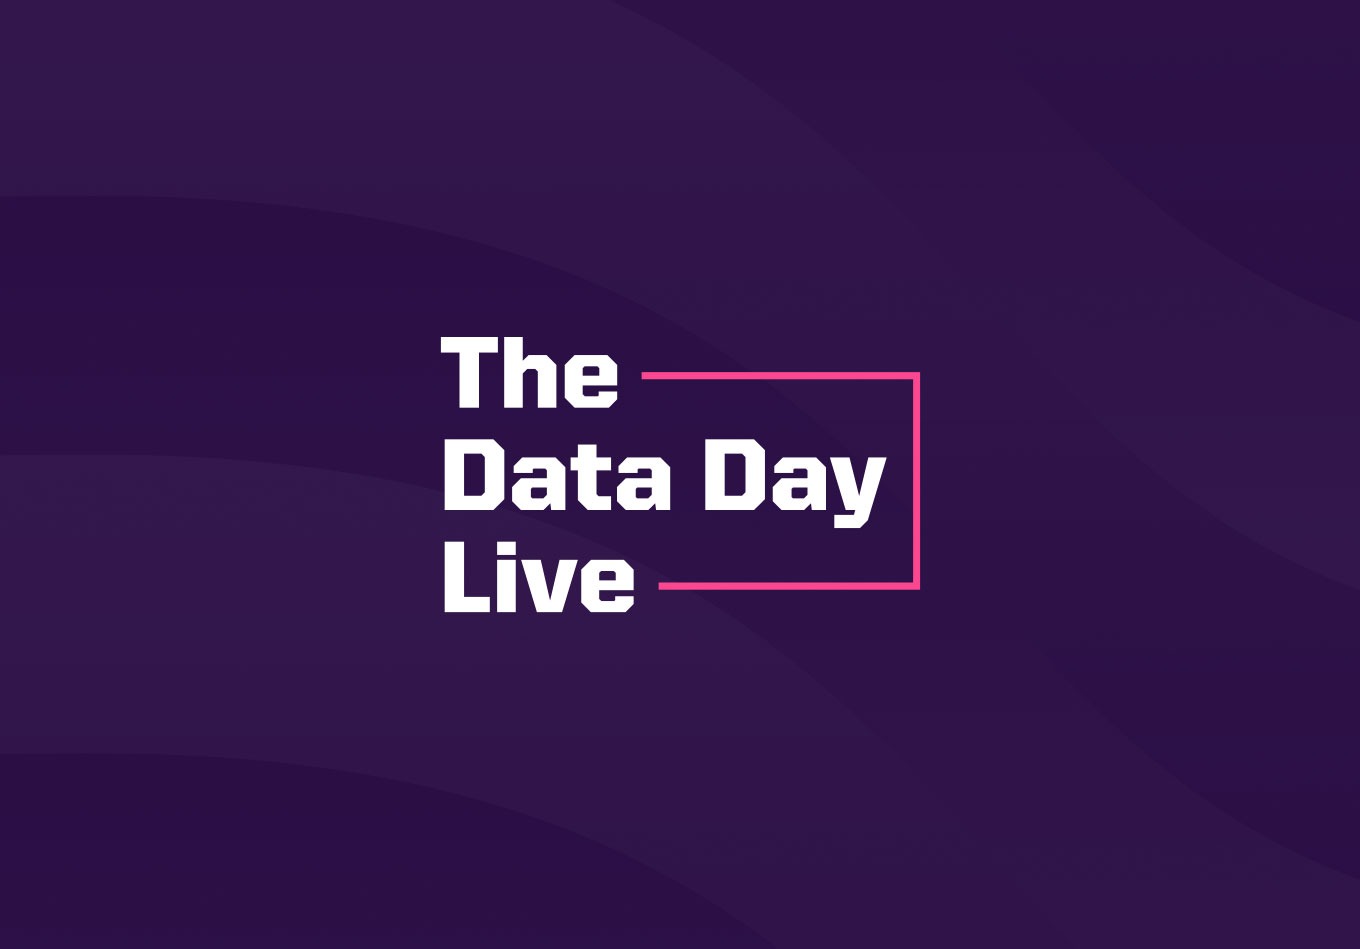 Premier League Matchday 3 Preview | Is Liverpool’s Title Bid Over? | The Data Day Live – August 19